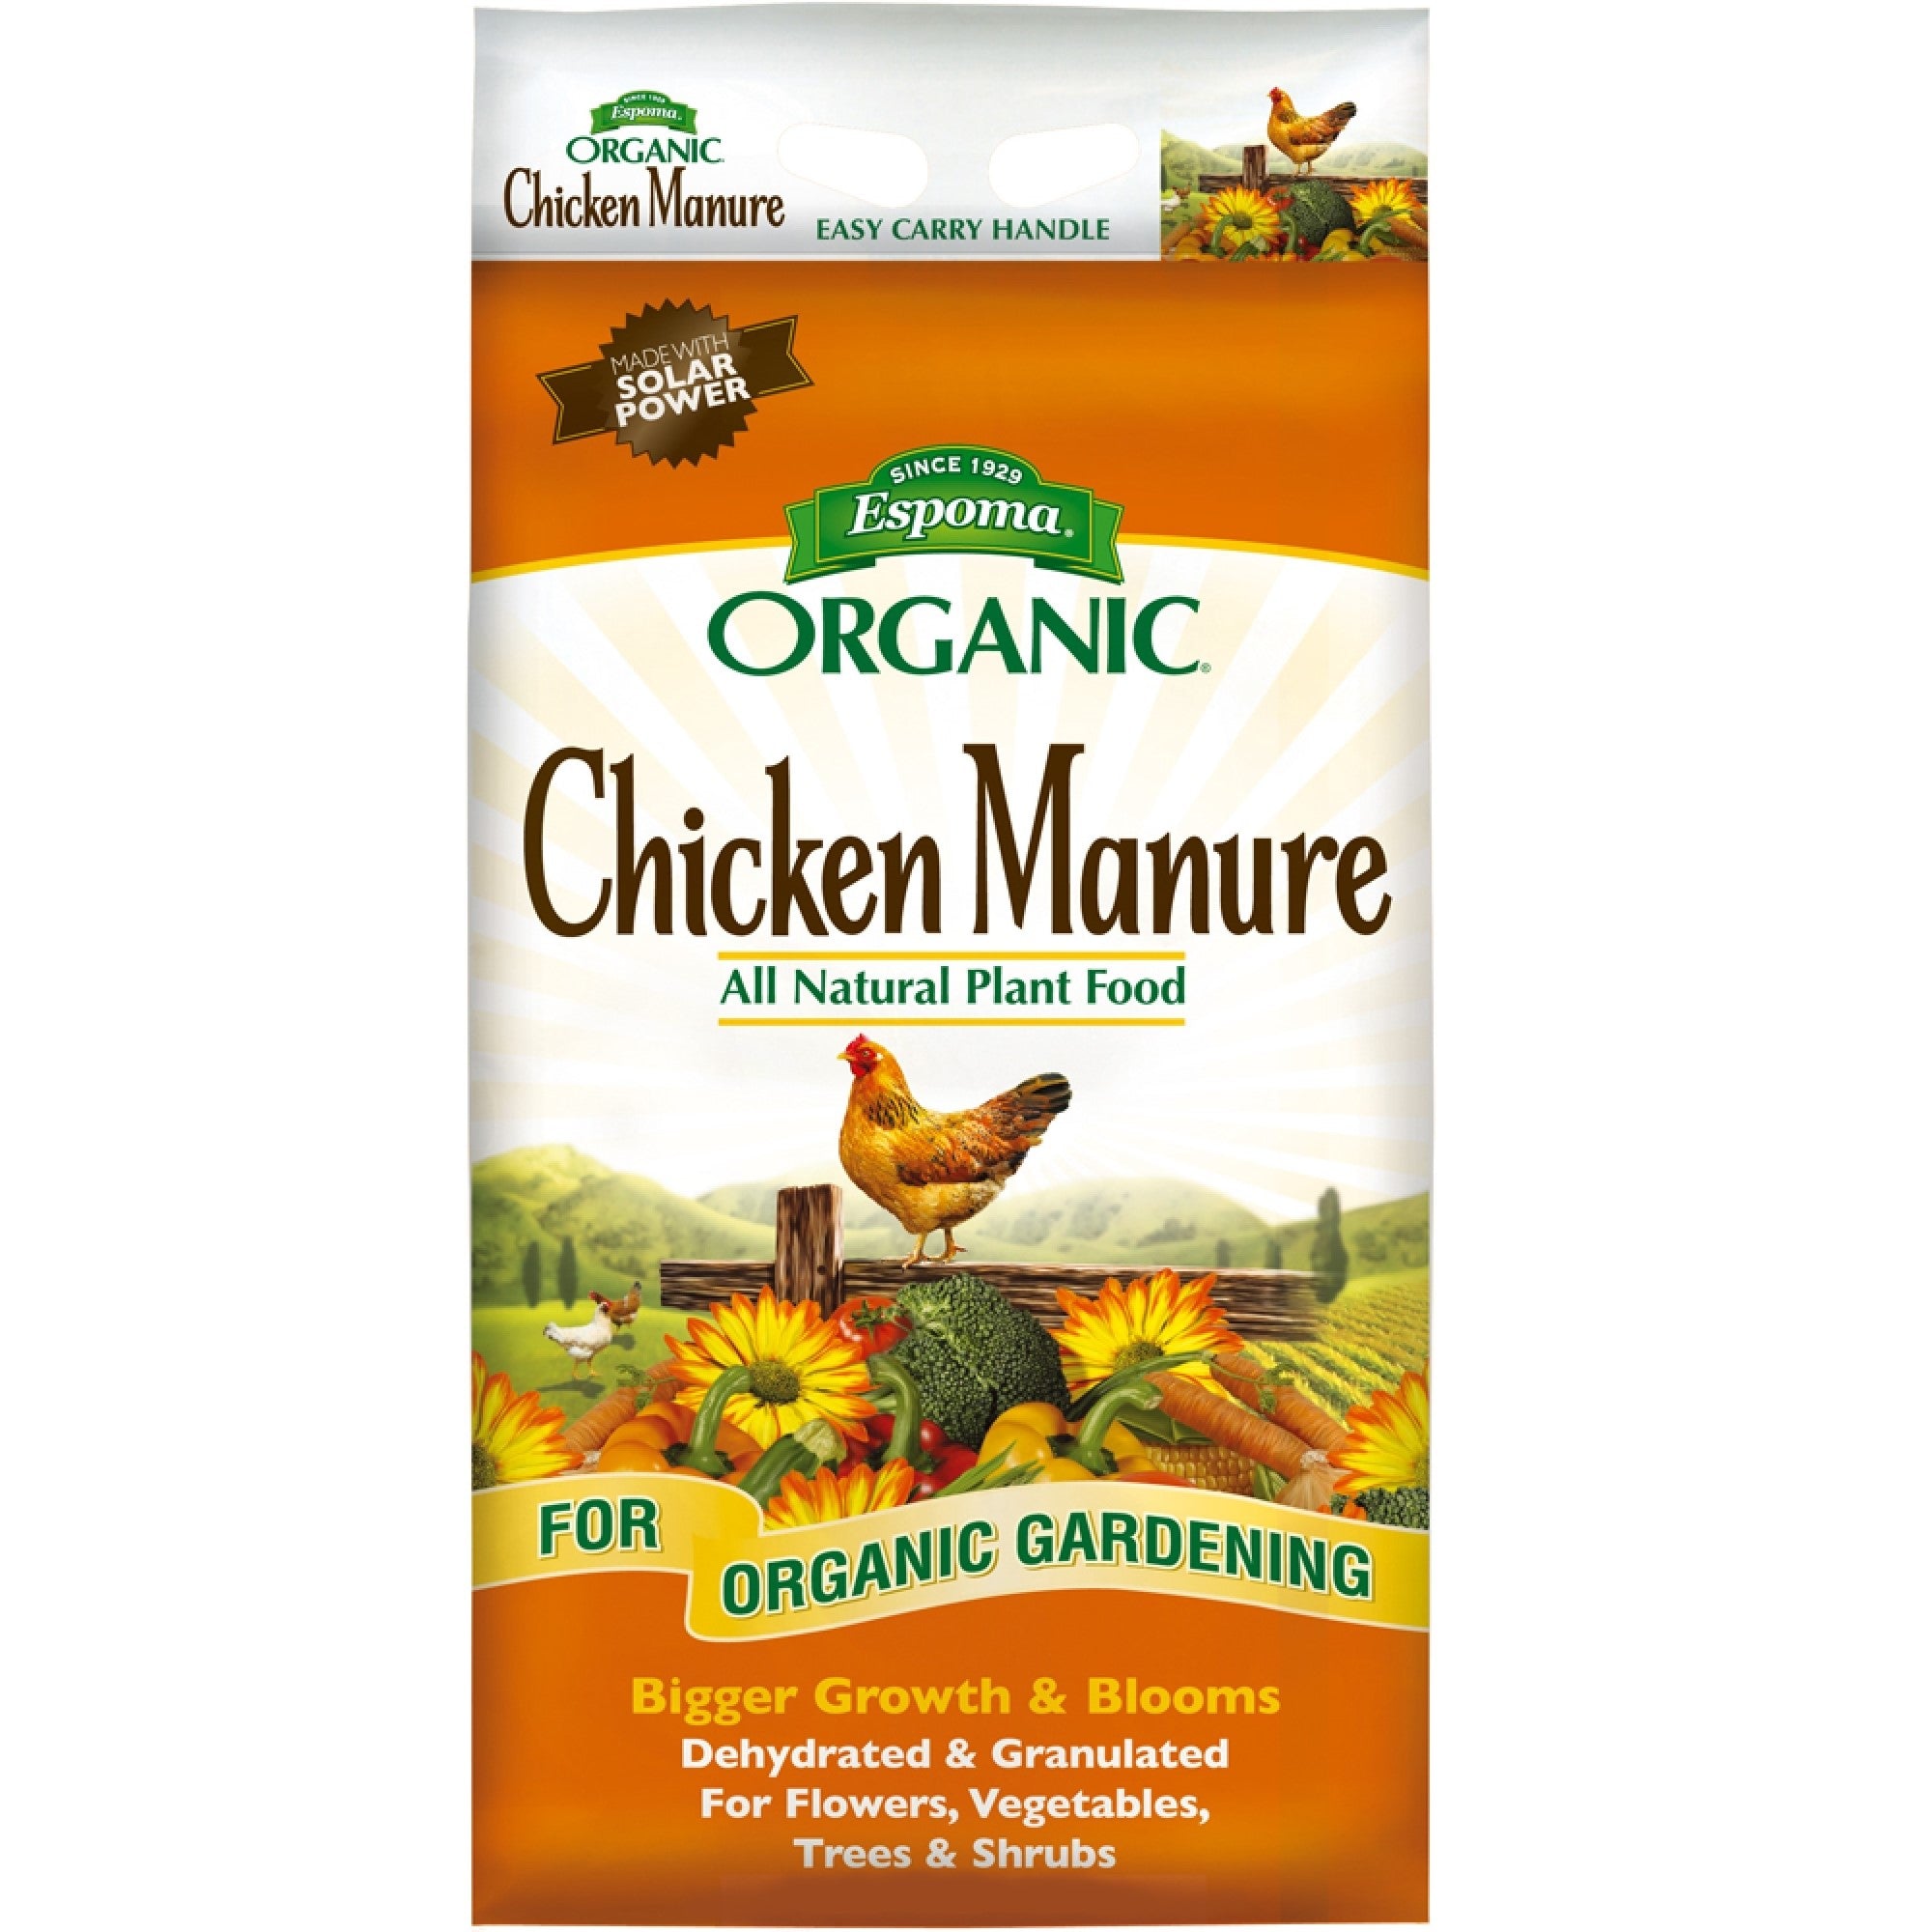 Espoma Organic Chicken Manure All Natural Plant Food for Organic Gardening- for Flowers, Vegetables, Trees, and Shrubs, Dehydrated & Granulated